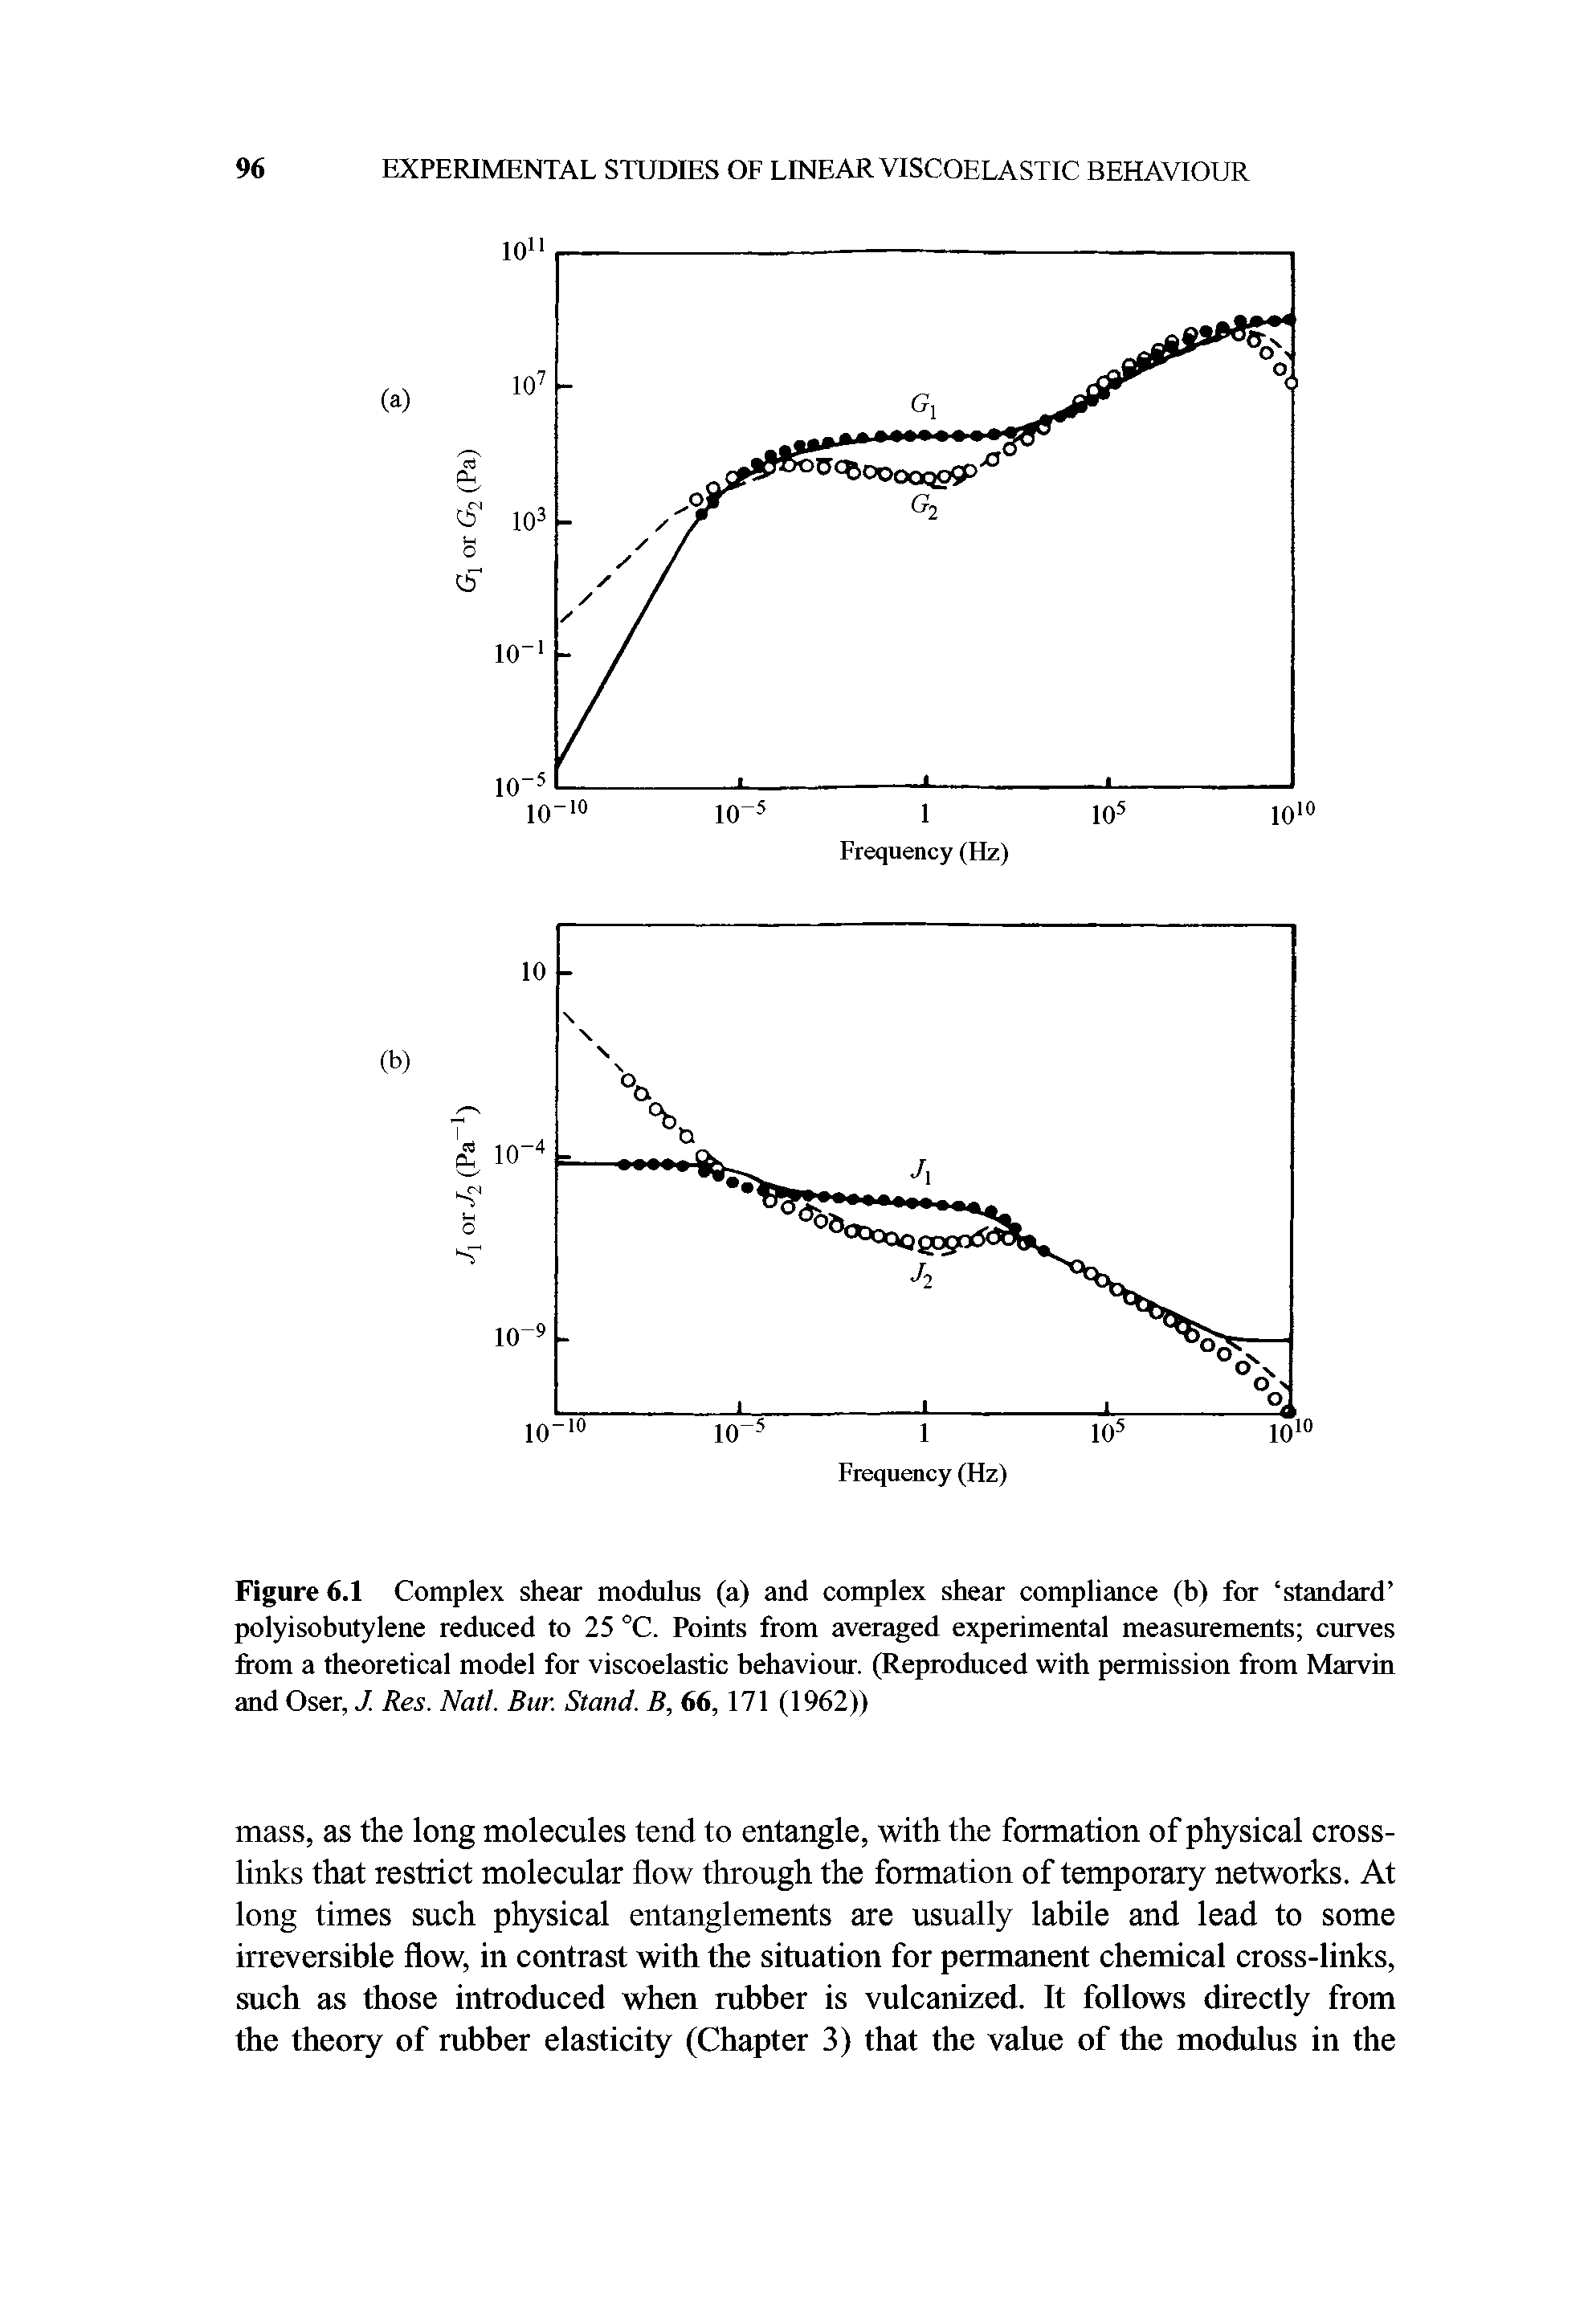 Figure 6.1 Complex shear modulus (a) and complex shear compliance (b) for standard polyisobutylene reduced to 25 °C. Points from averaged experimental measurements curves from a theoretical model for viscoelastic behaviour. (Reproduced with permission from Marvin and Oser, J. Res. Natl. Bur. Stand. B, 66,171 (1962))...